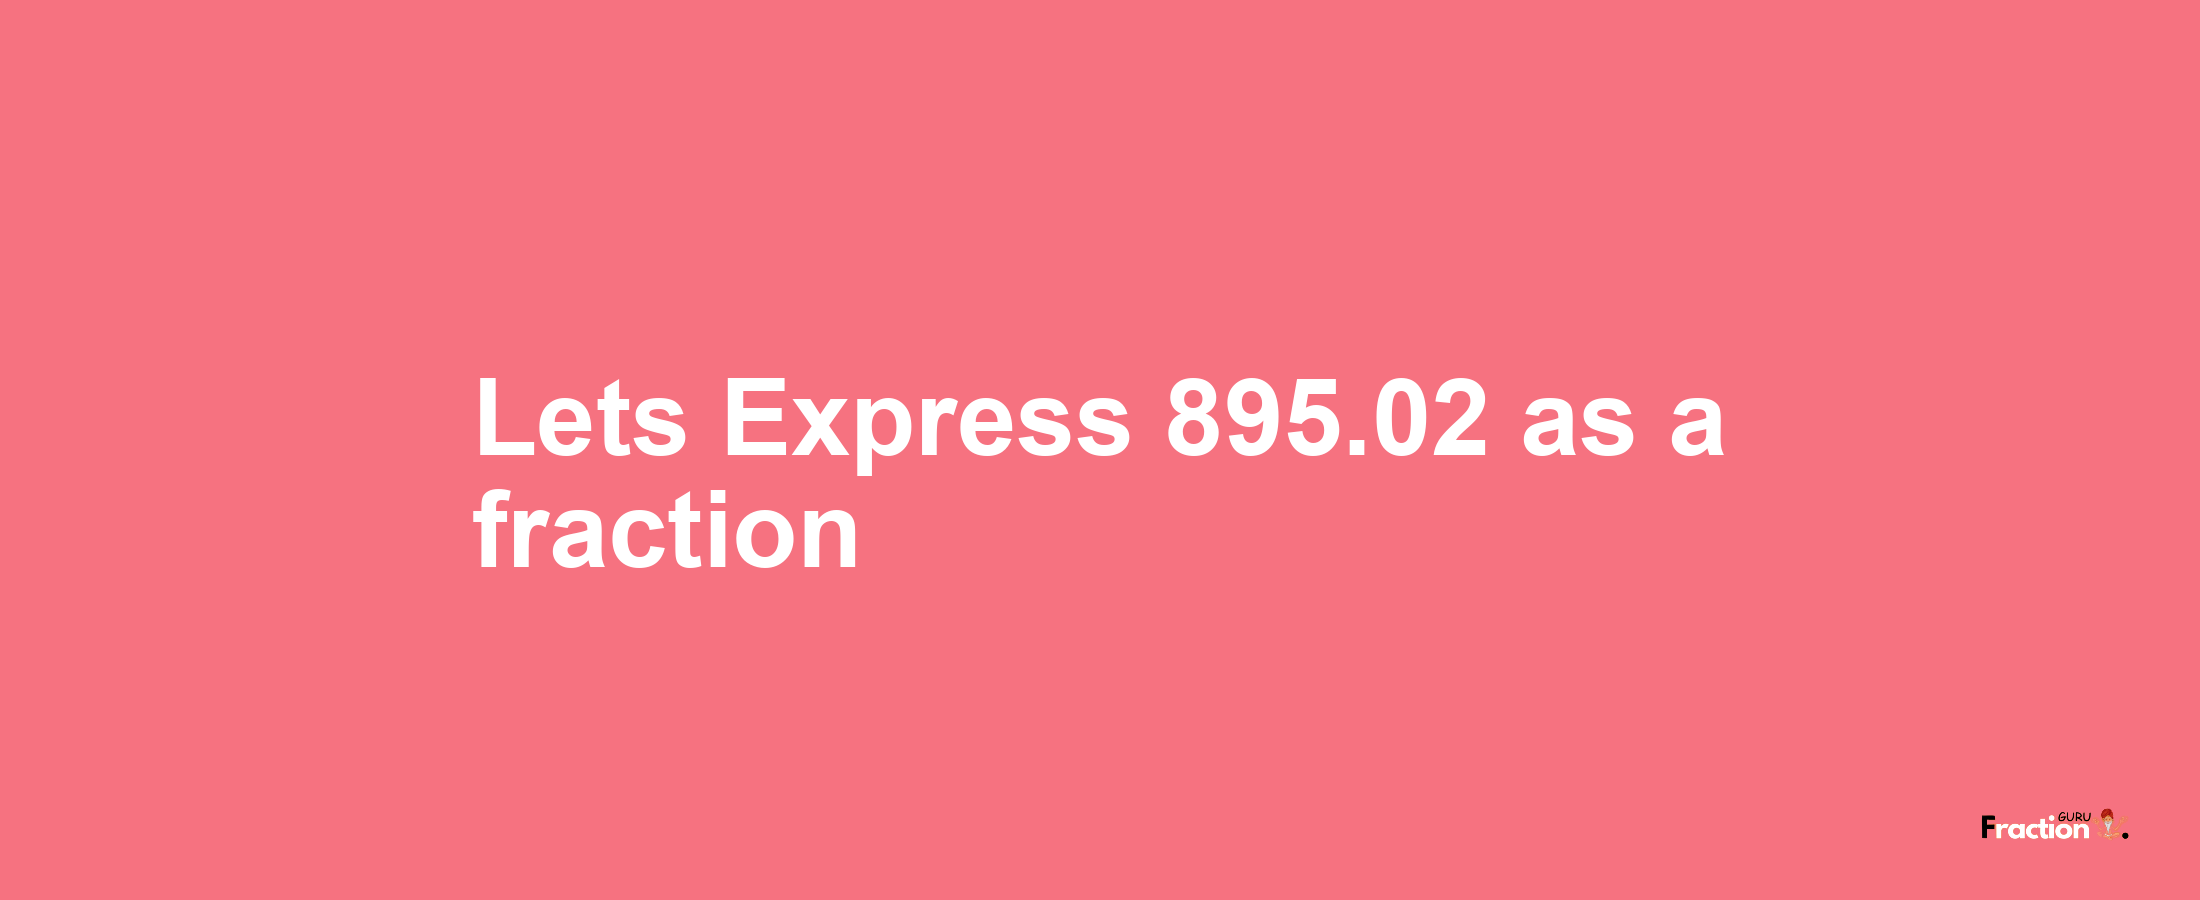 Lets Express 895.02 as afraction